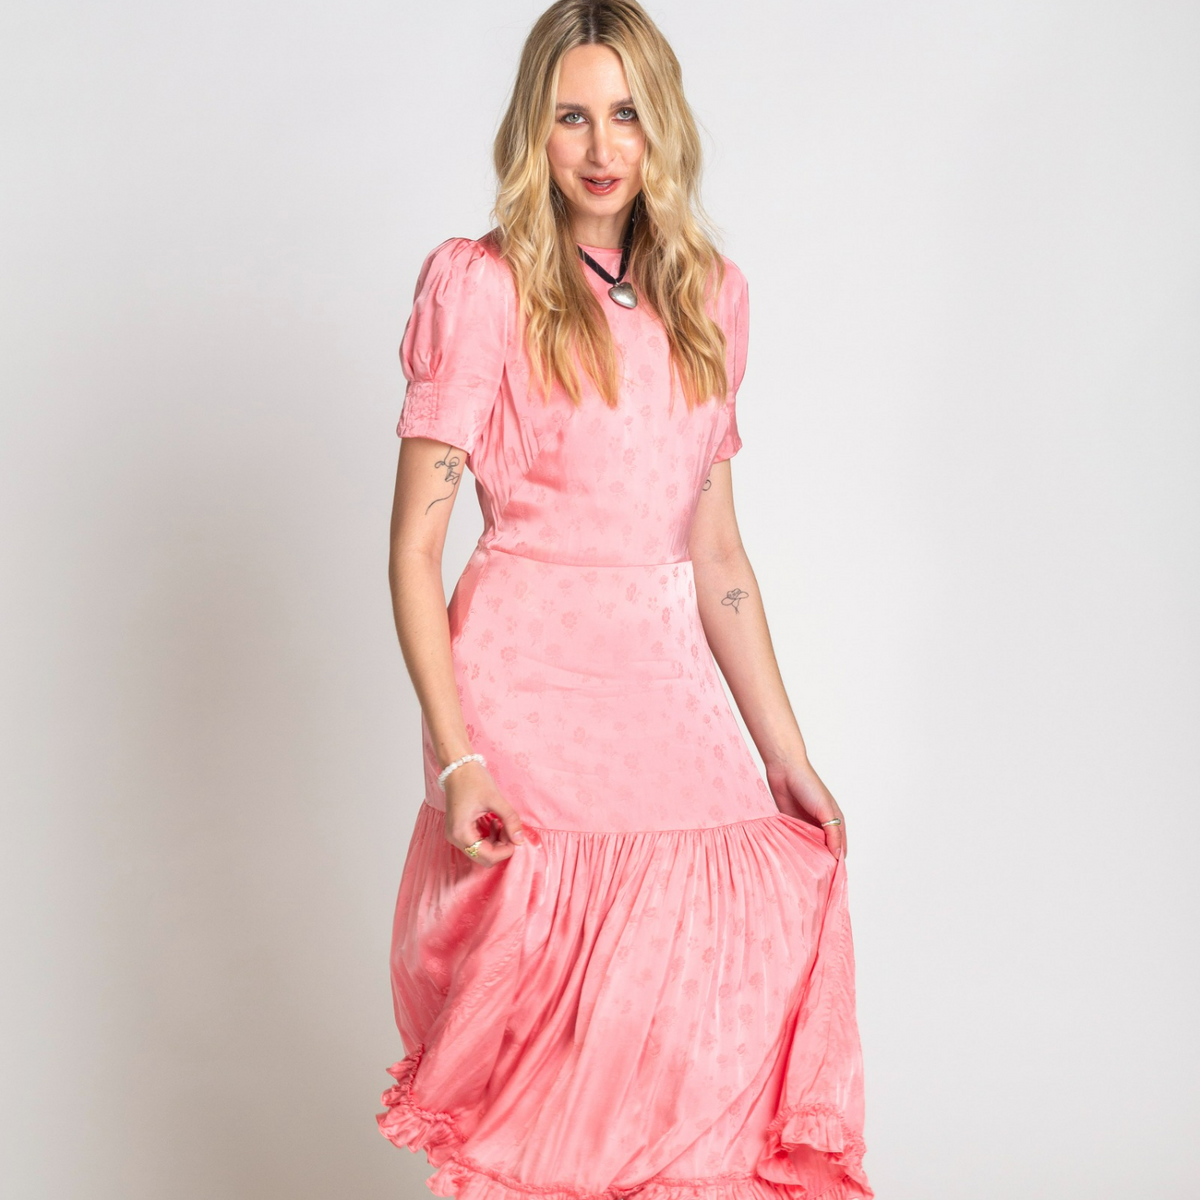 The Vampire's Wife Pink Floral Satin Dress